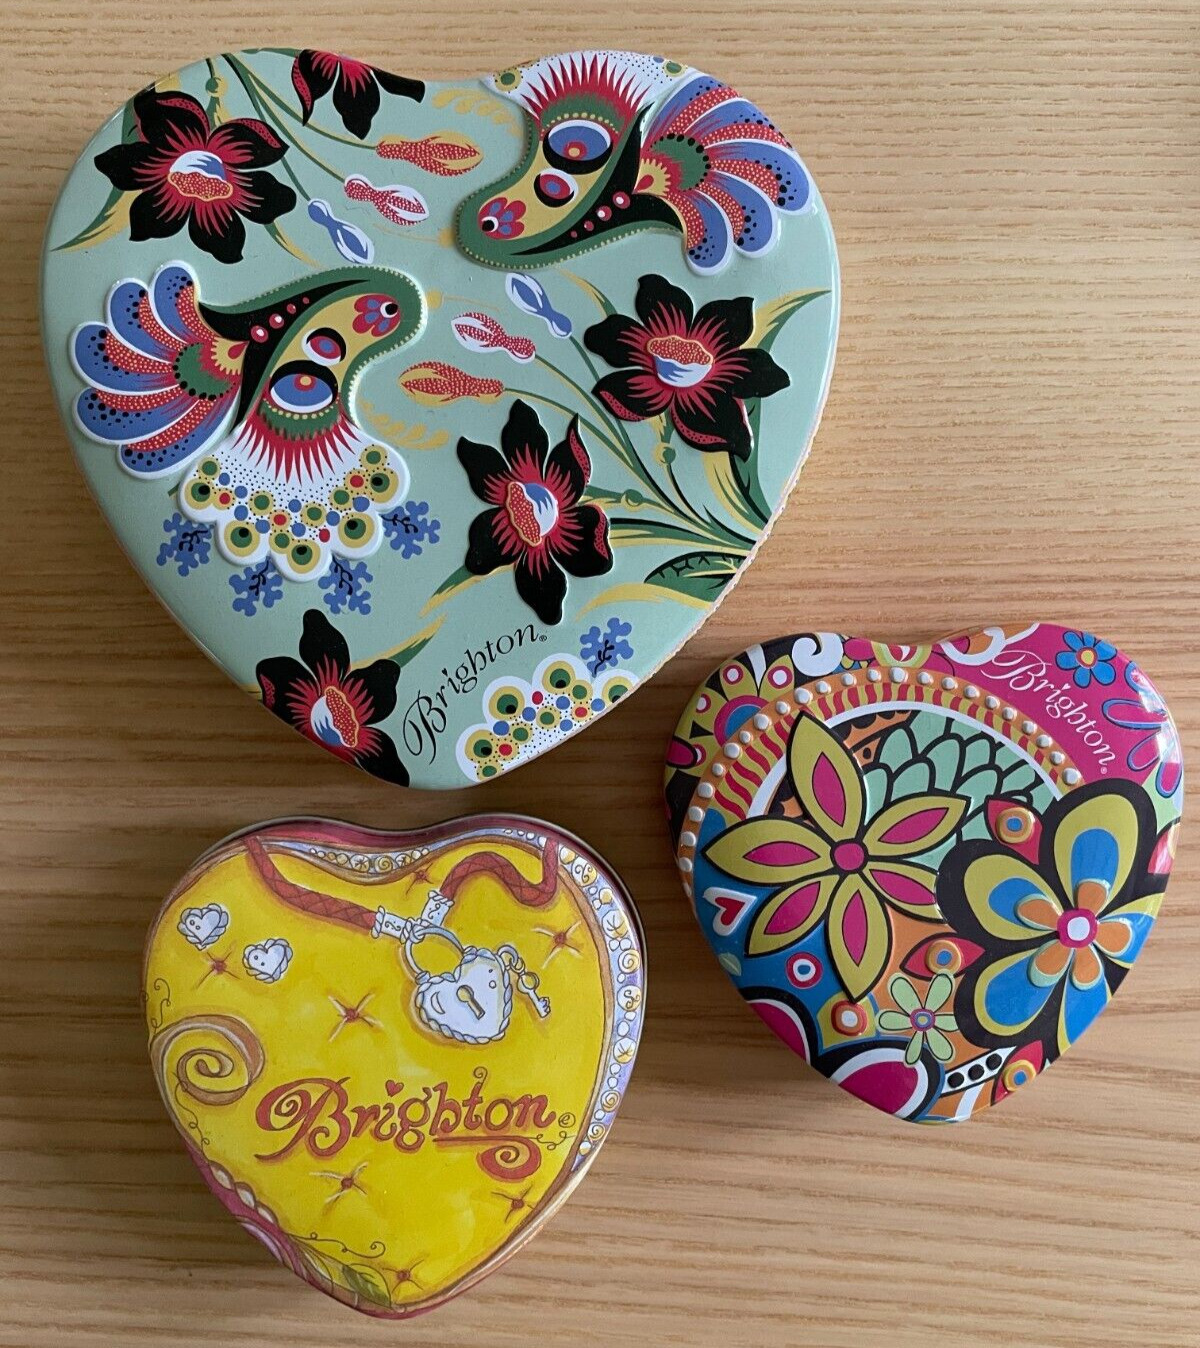 Lot of 3 Decorative BRIGHTON Heart Tins Boxes birds and flowers